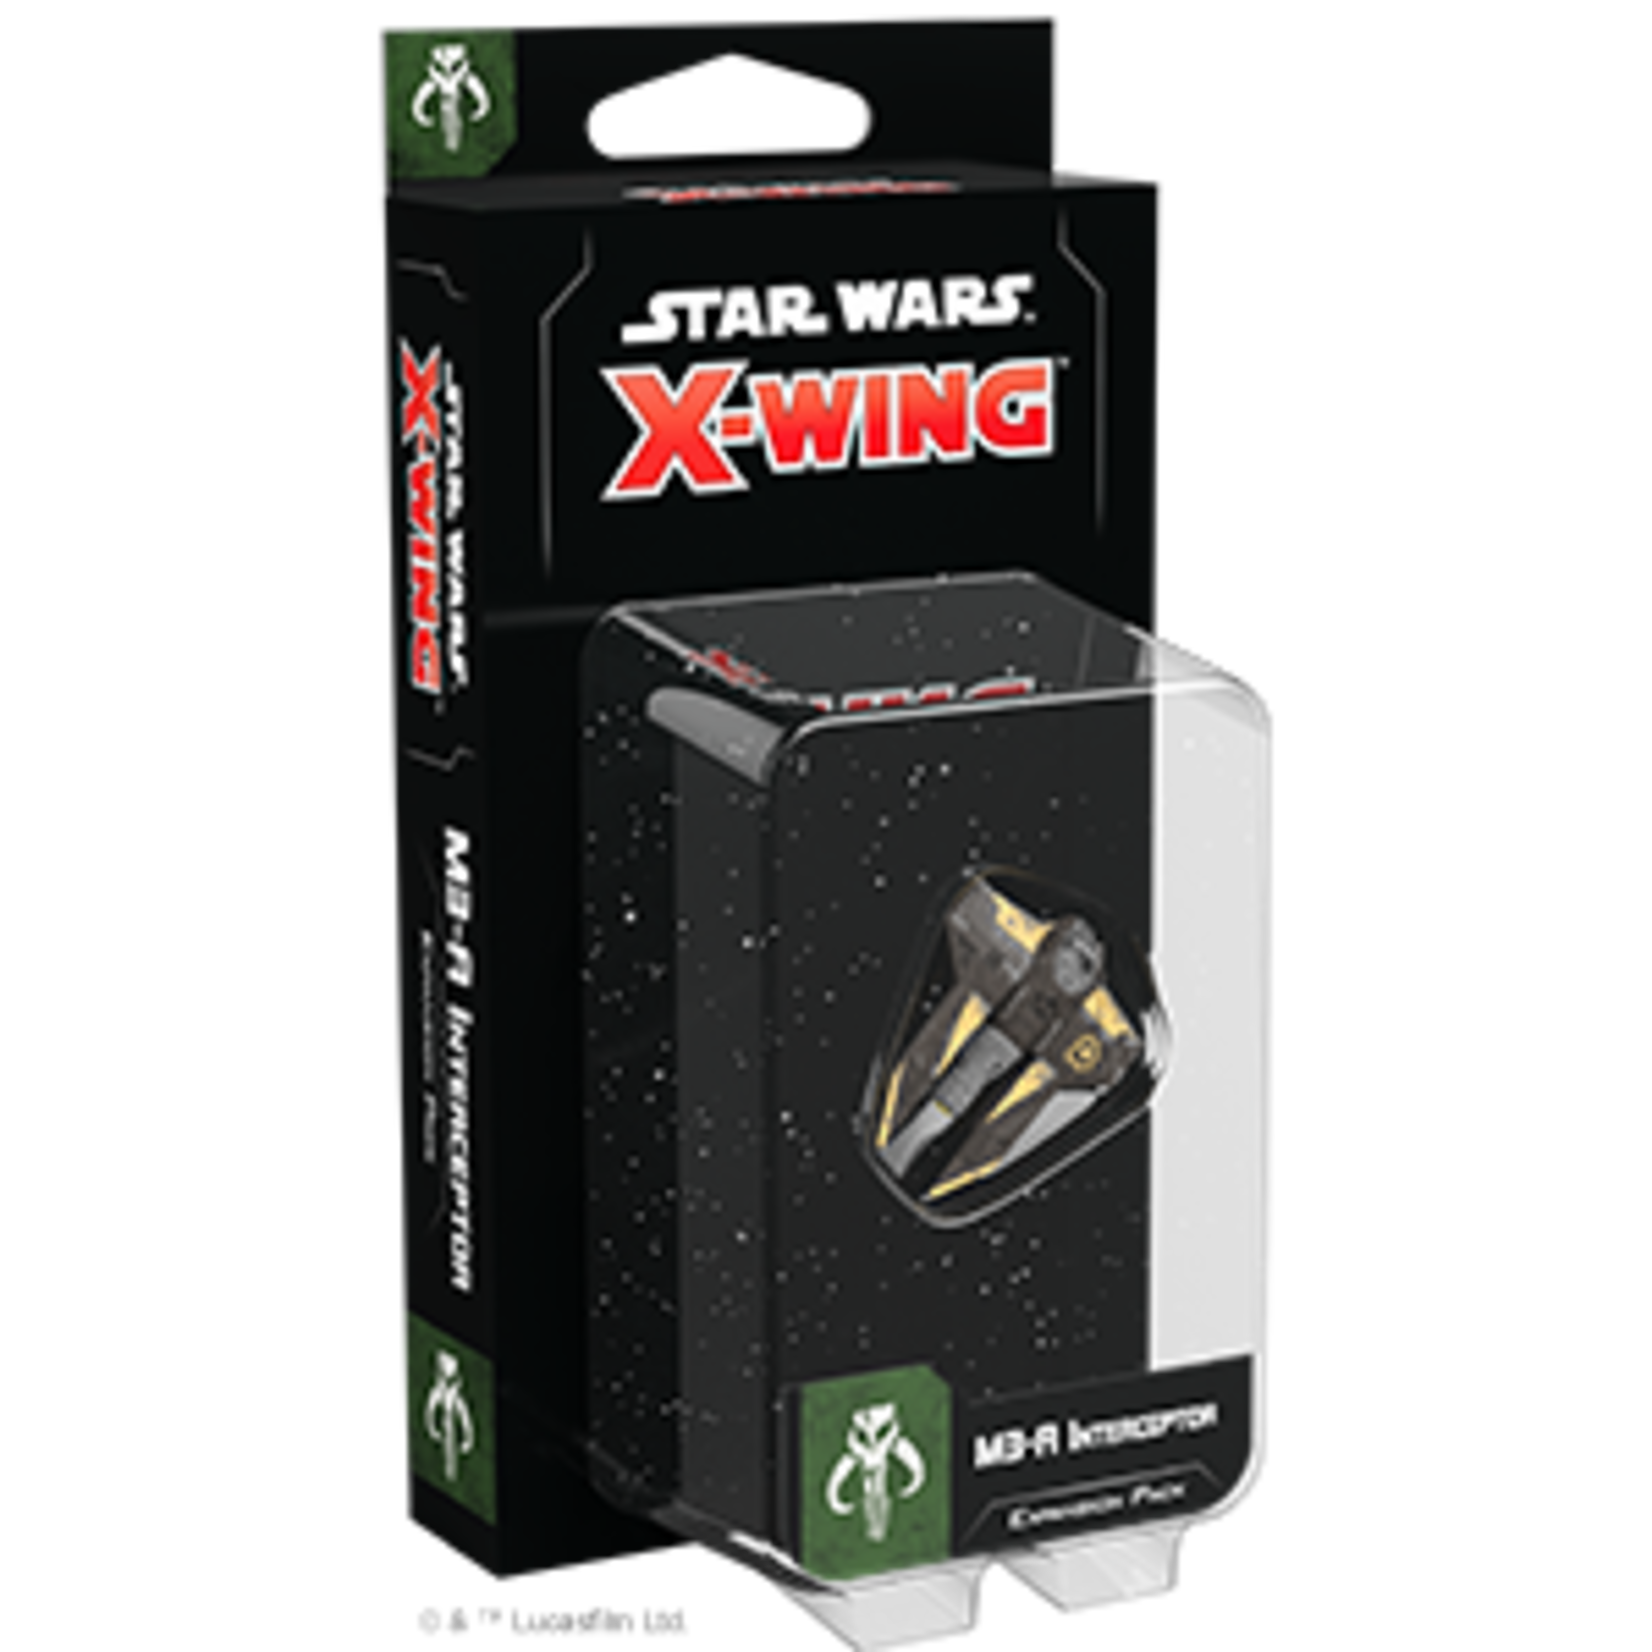 Fantasy Flight Games Star Wars X-Wing: 2nd Edition - M3-A Interceptor Expansion Pack